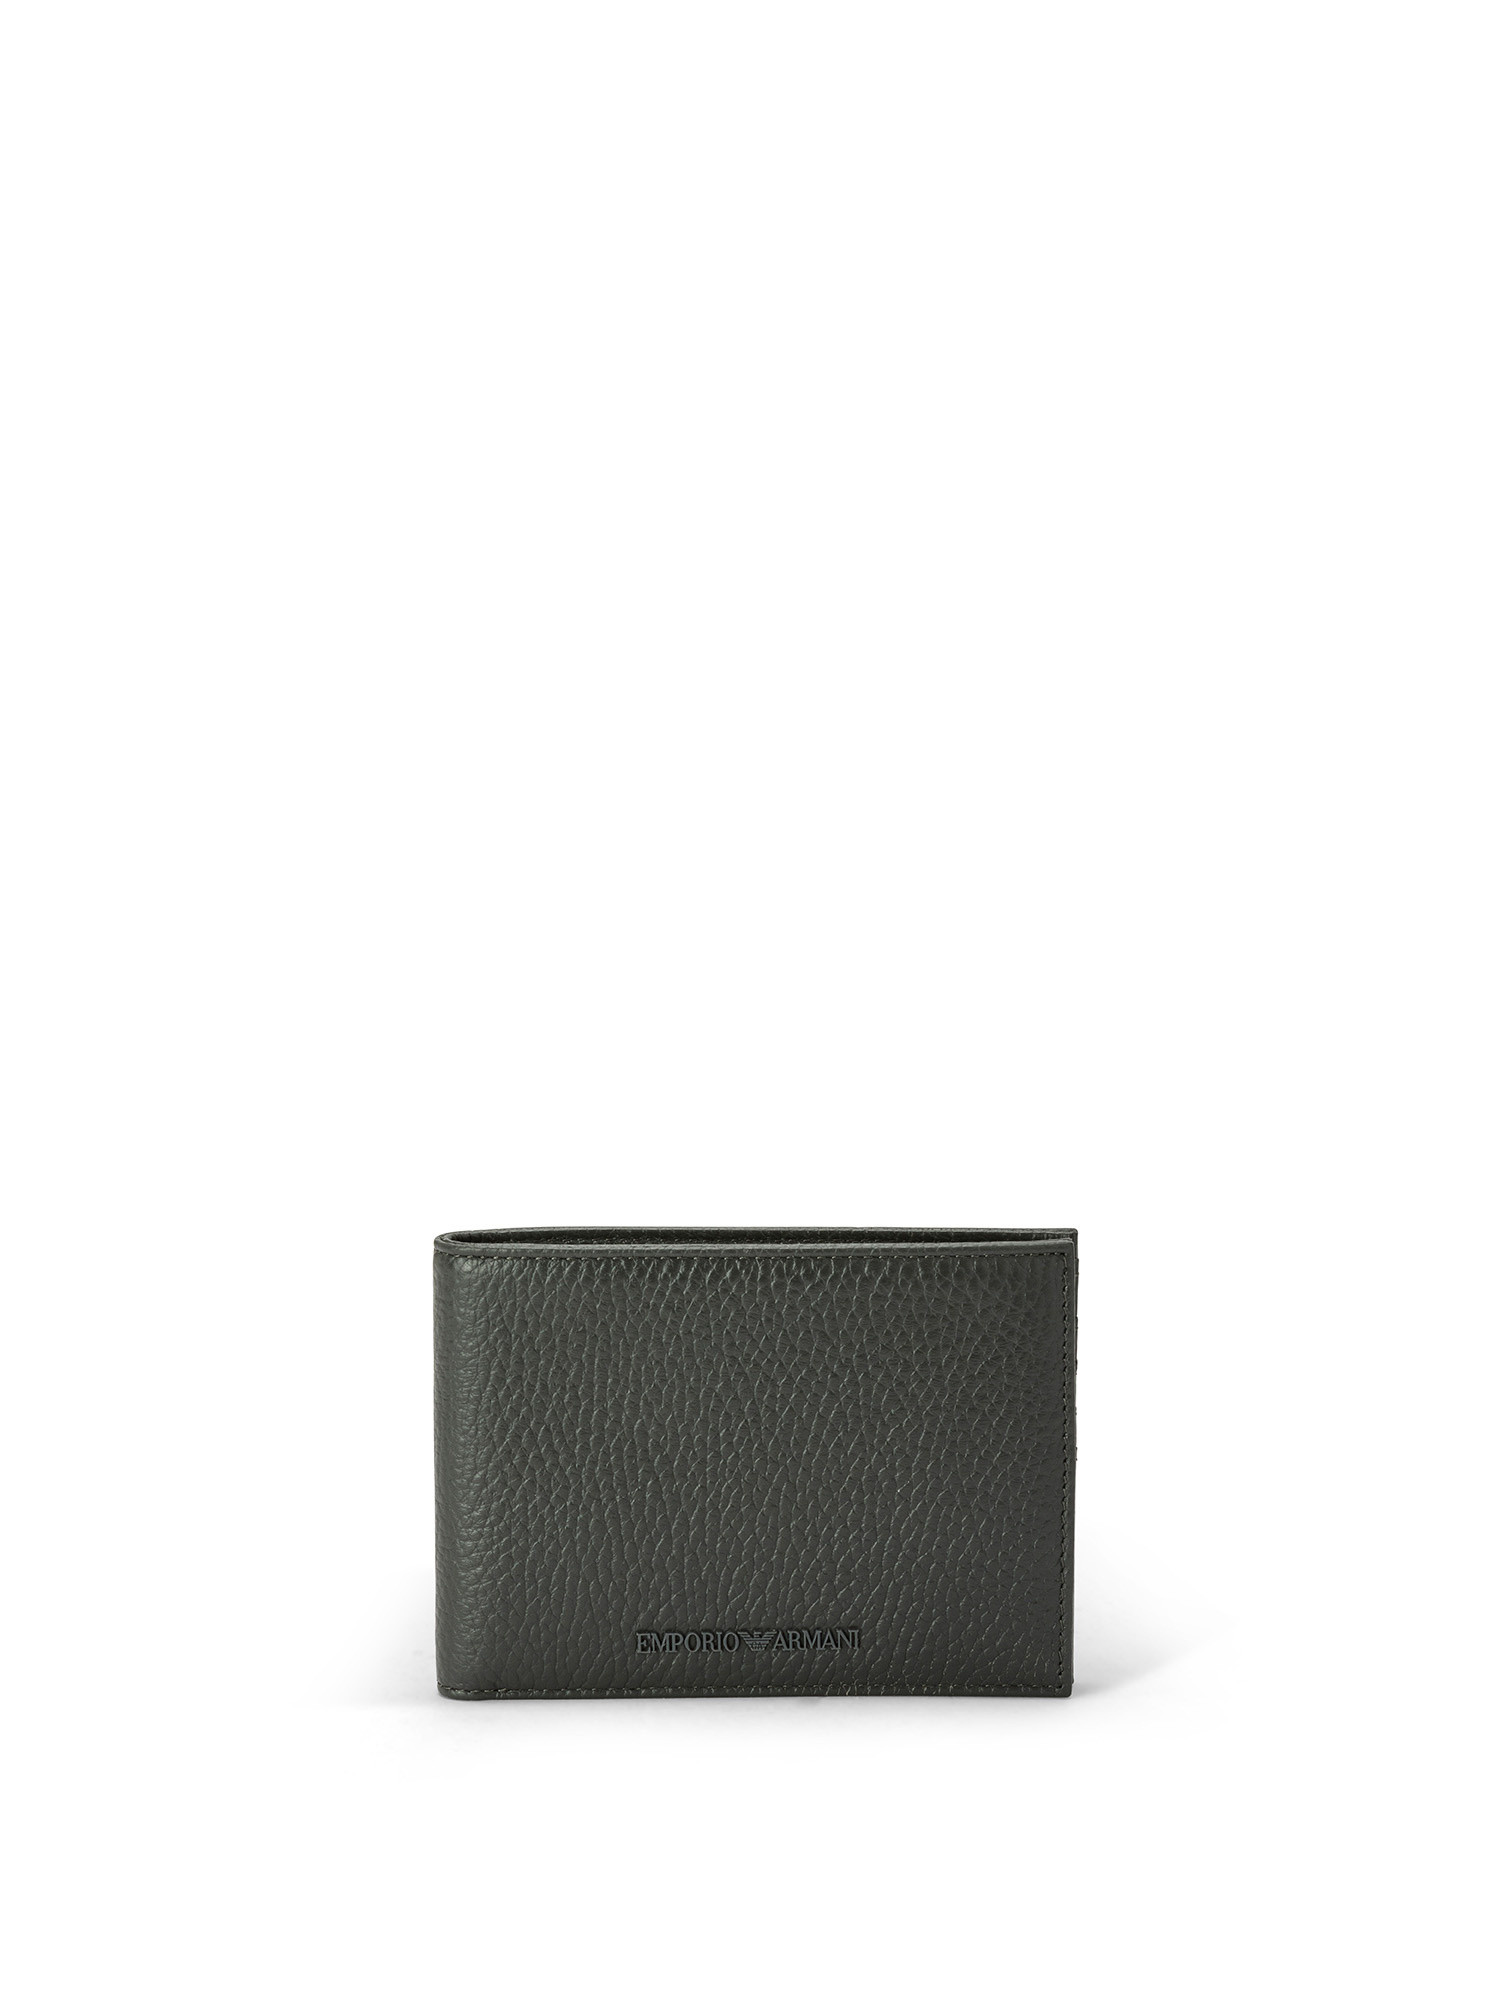 Emporio Armani - Wallet in tumbled leather, Dark Grey, large image number 0